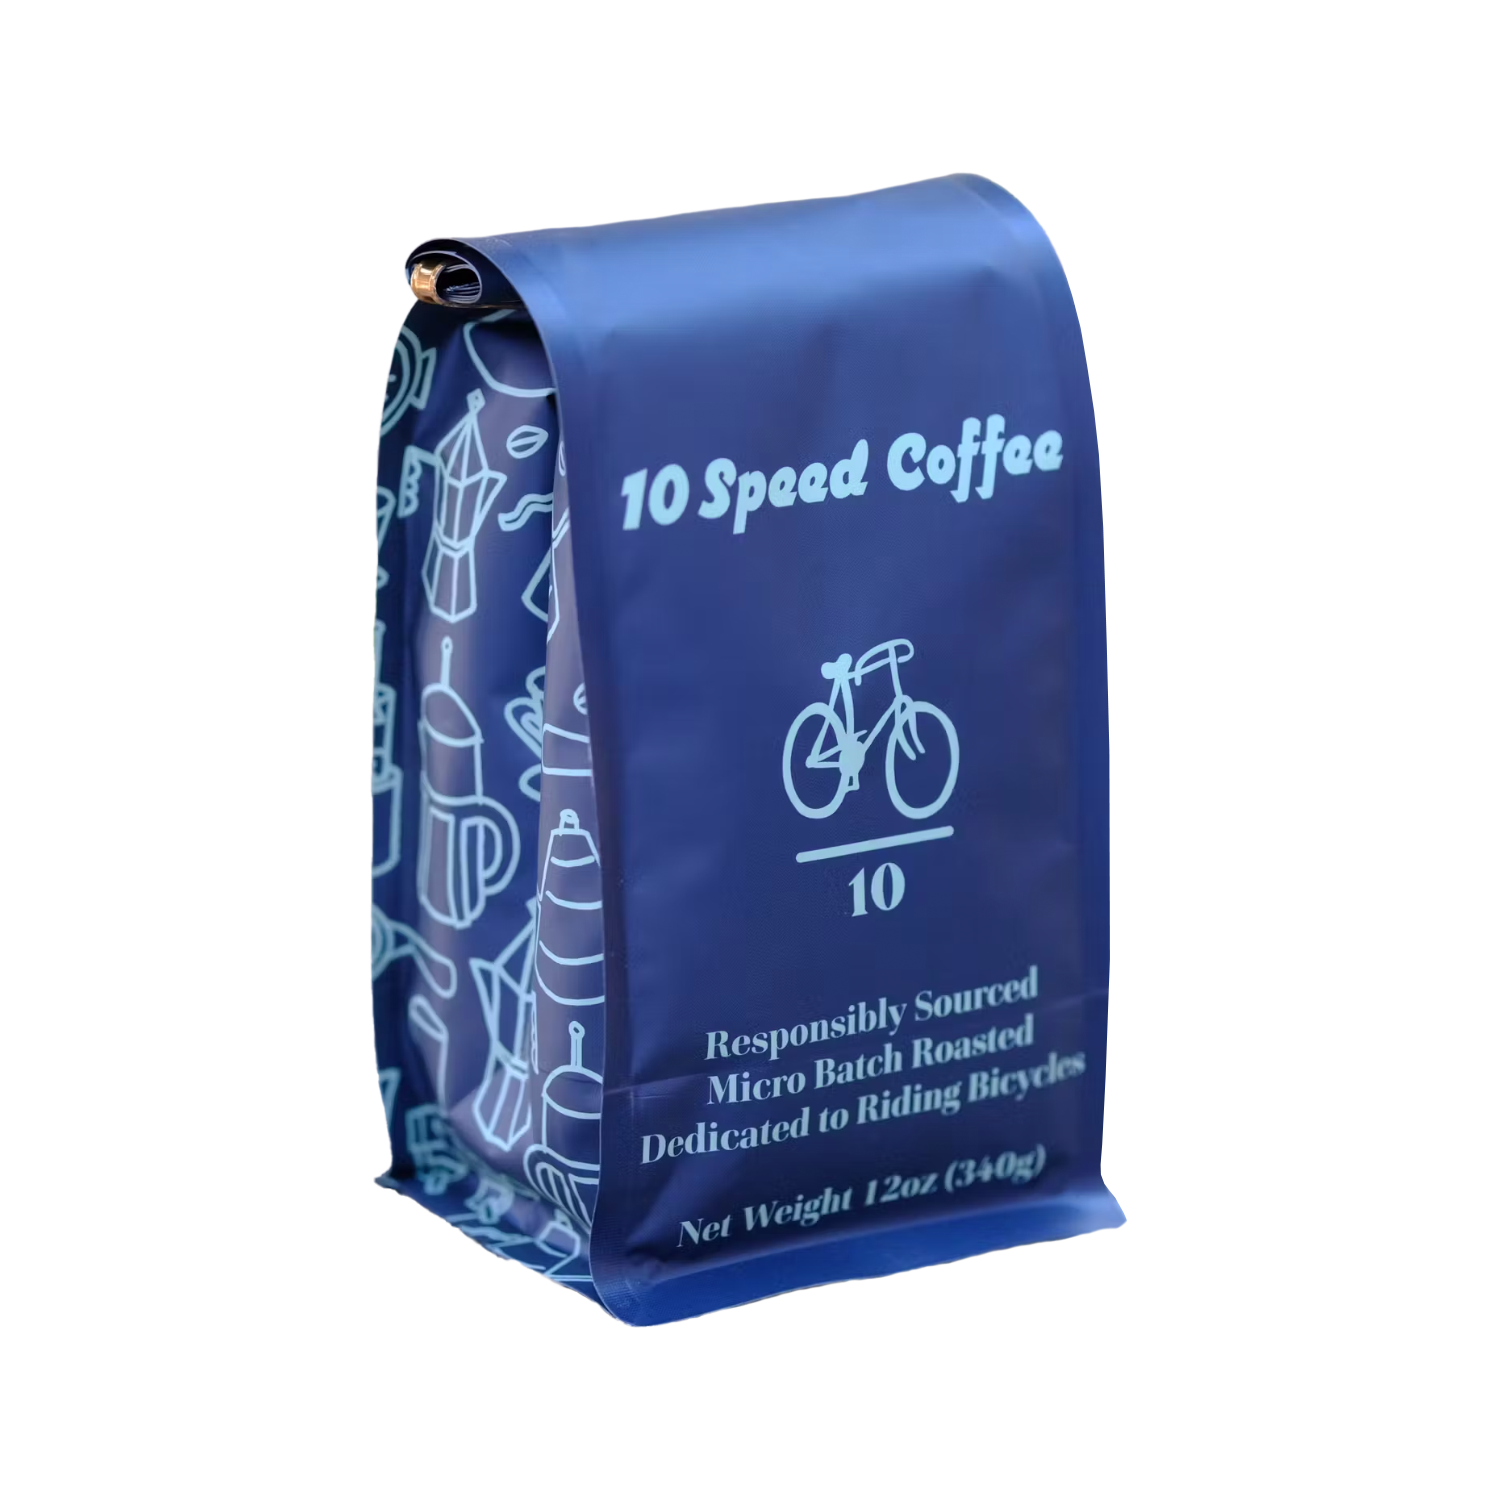 Coffee bag from 10 Speed, 12 oz